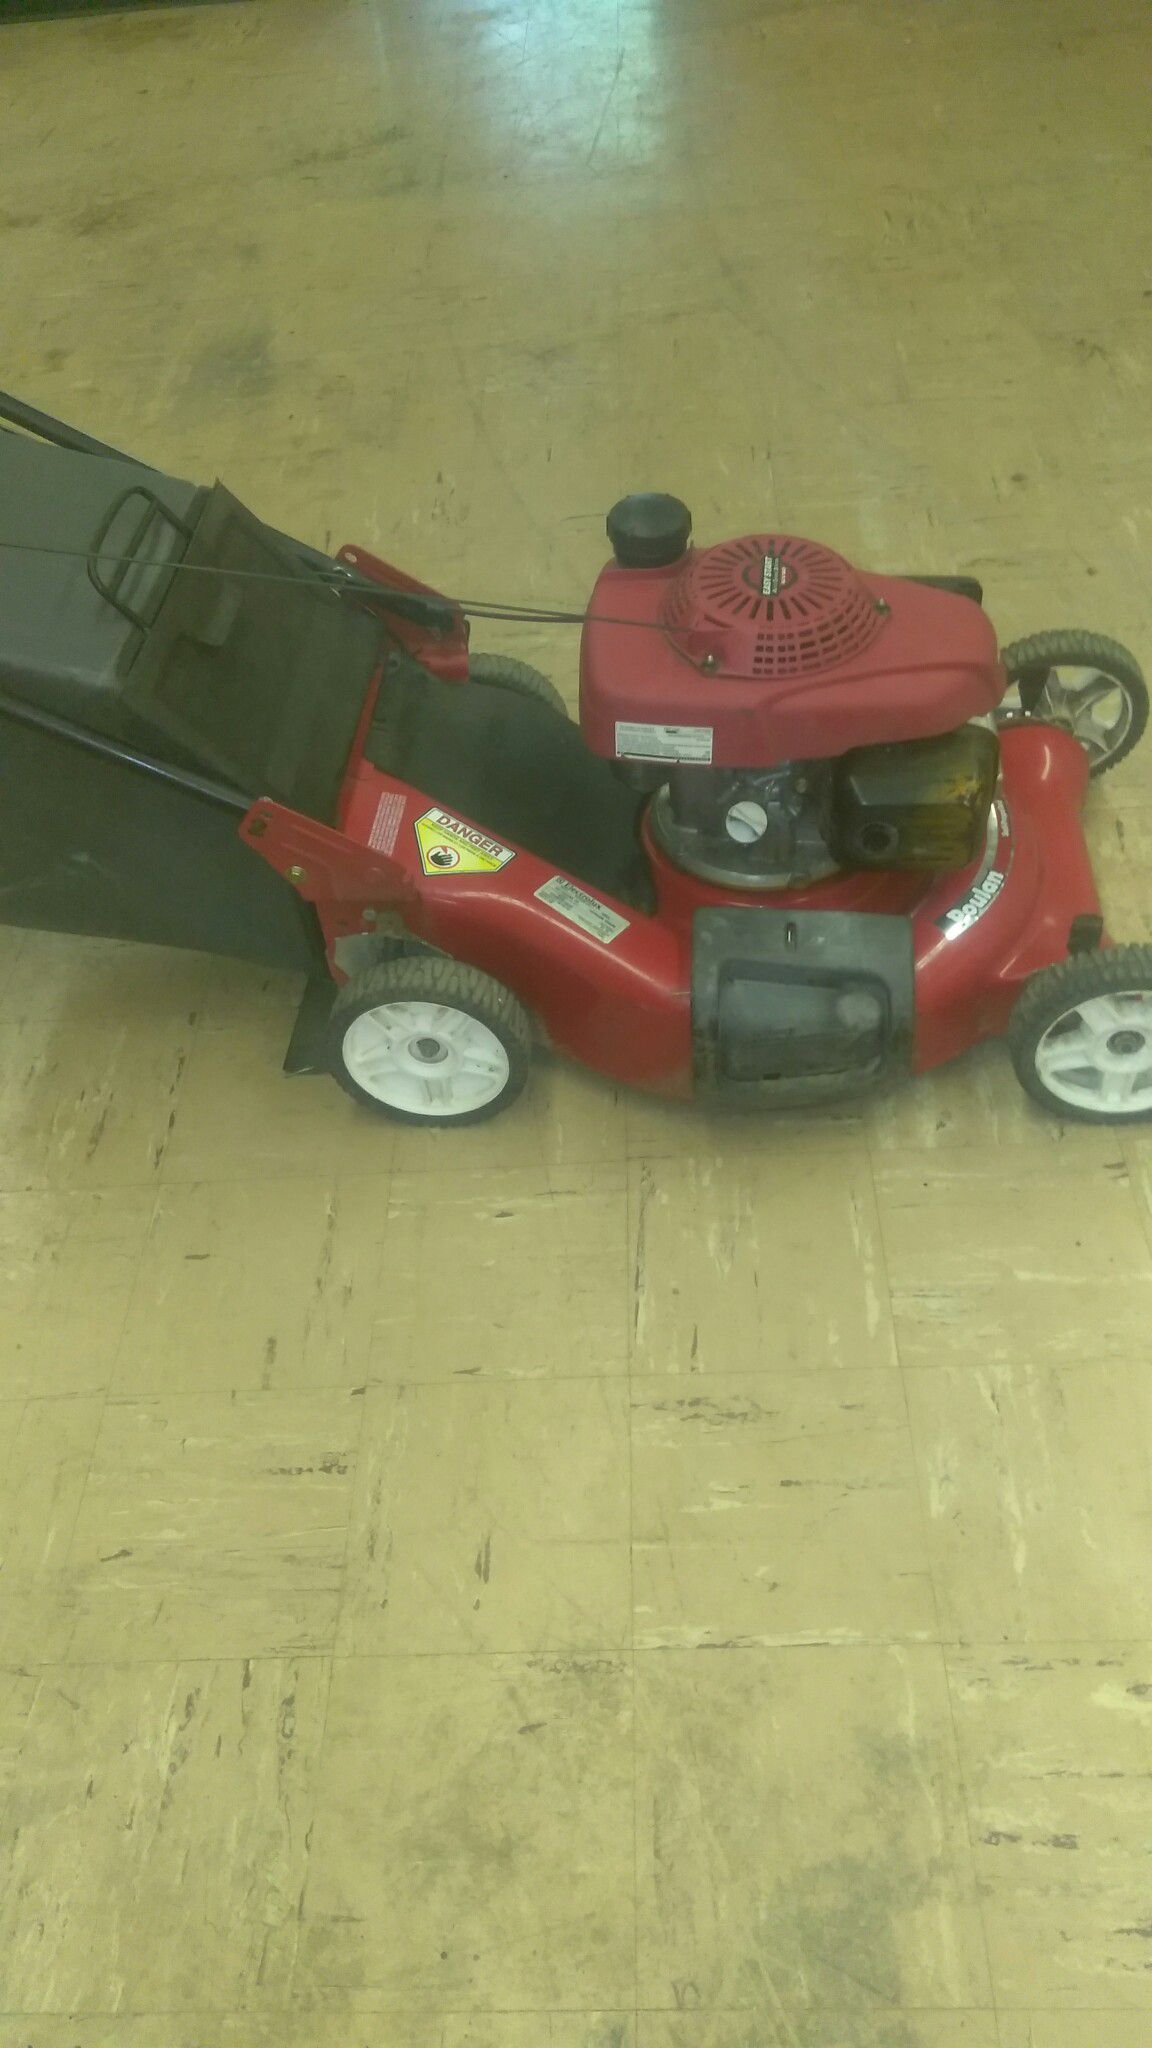 Honda self-propelled lawn mower with a bag